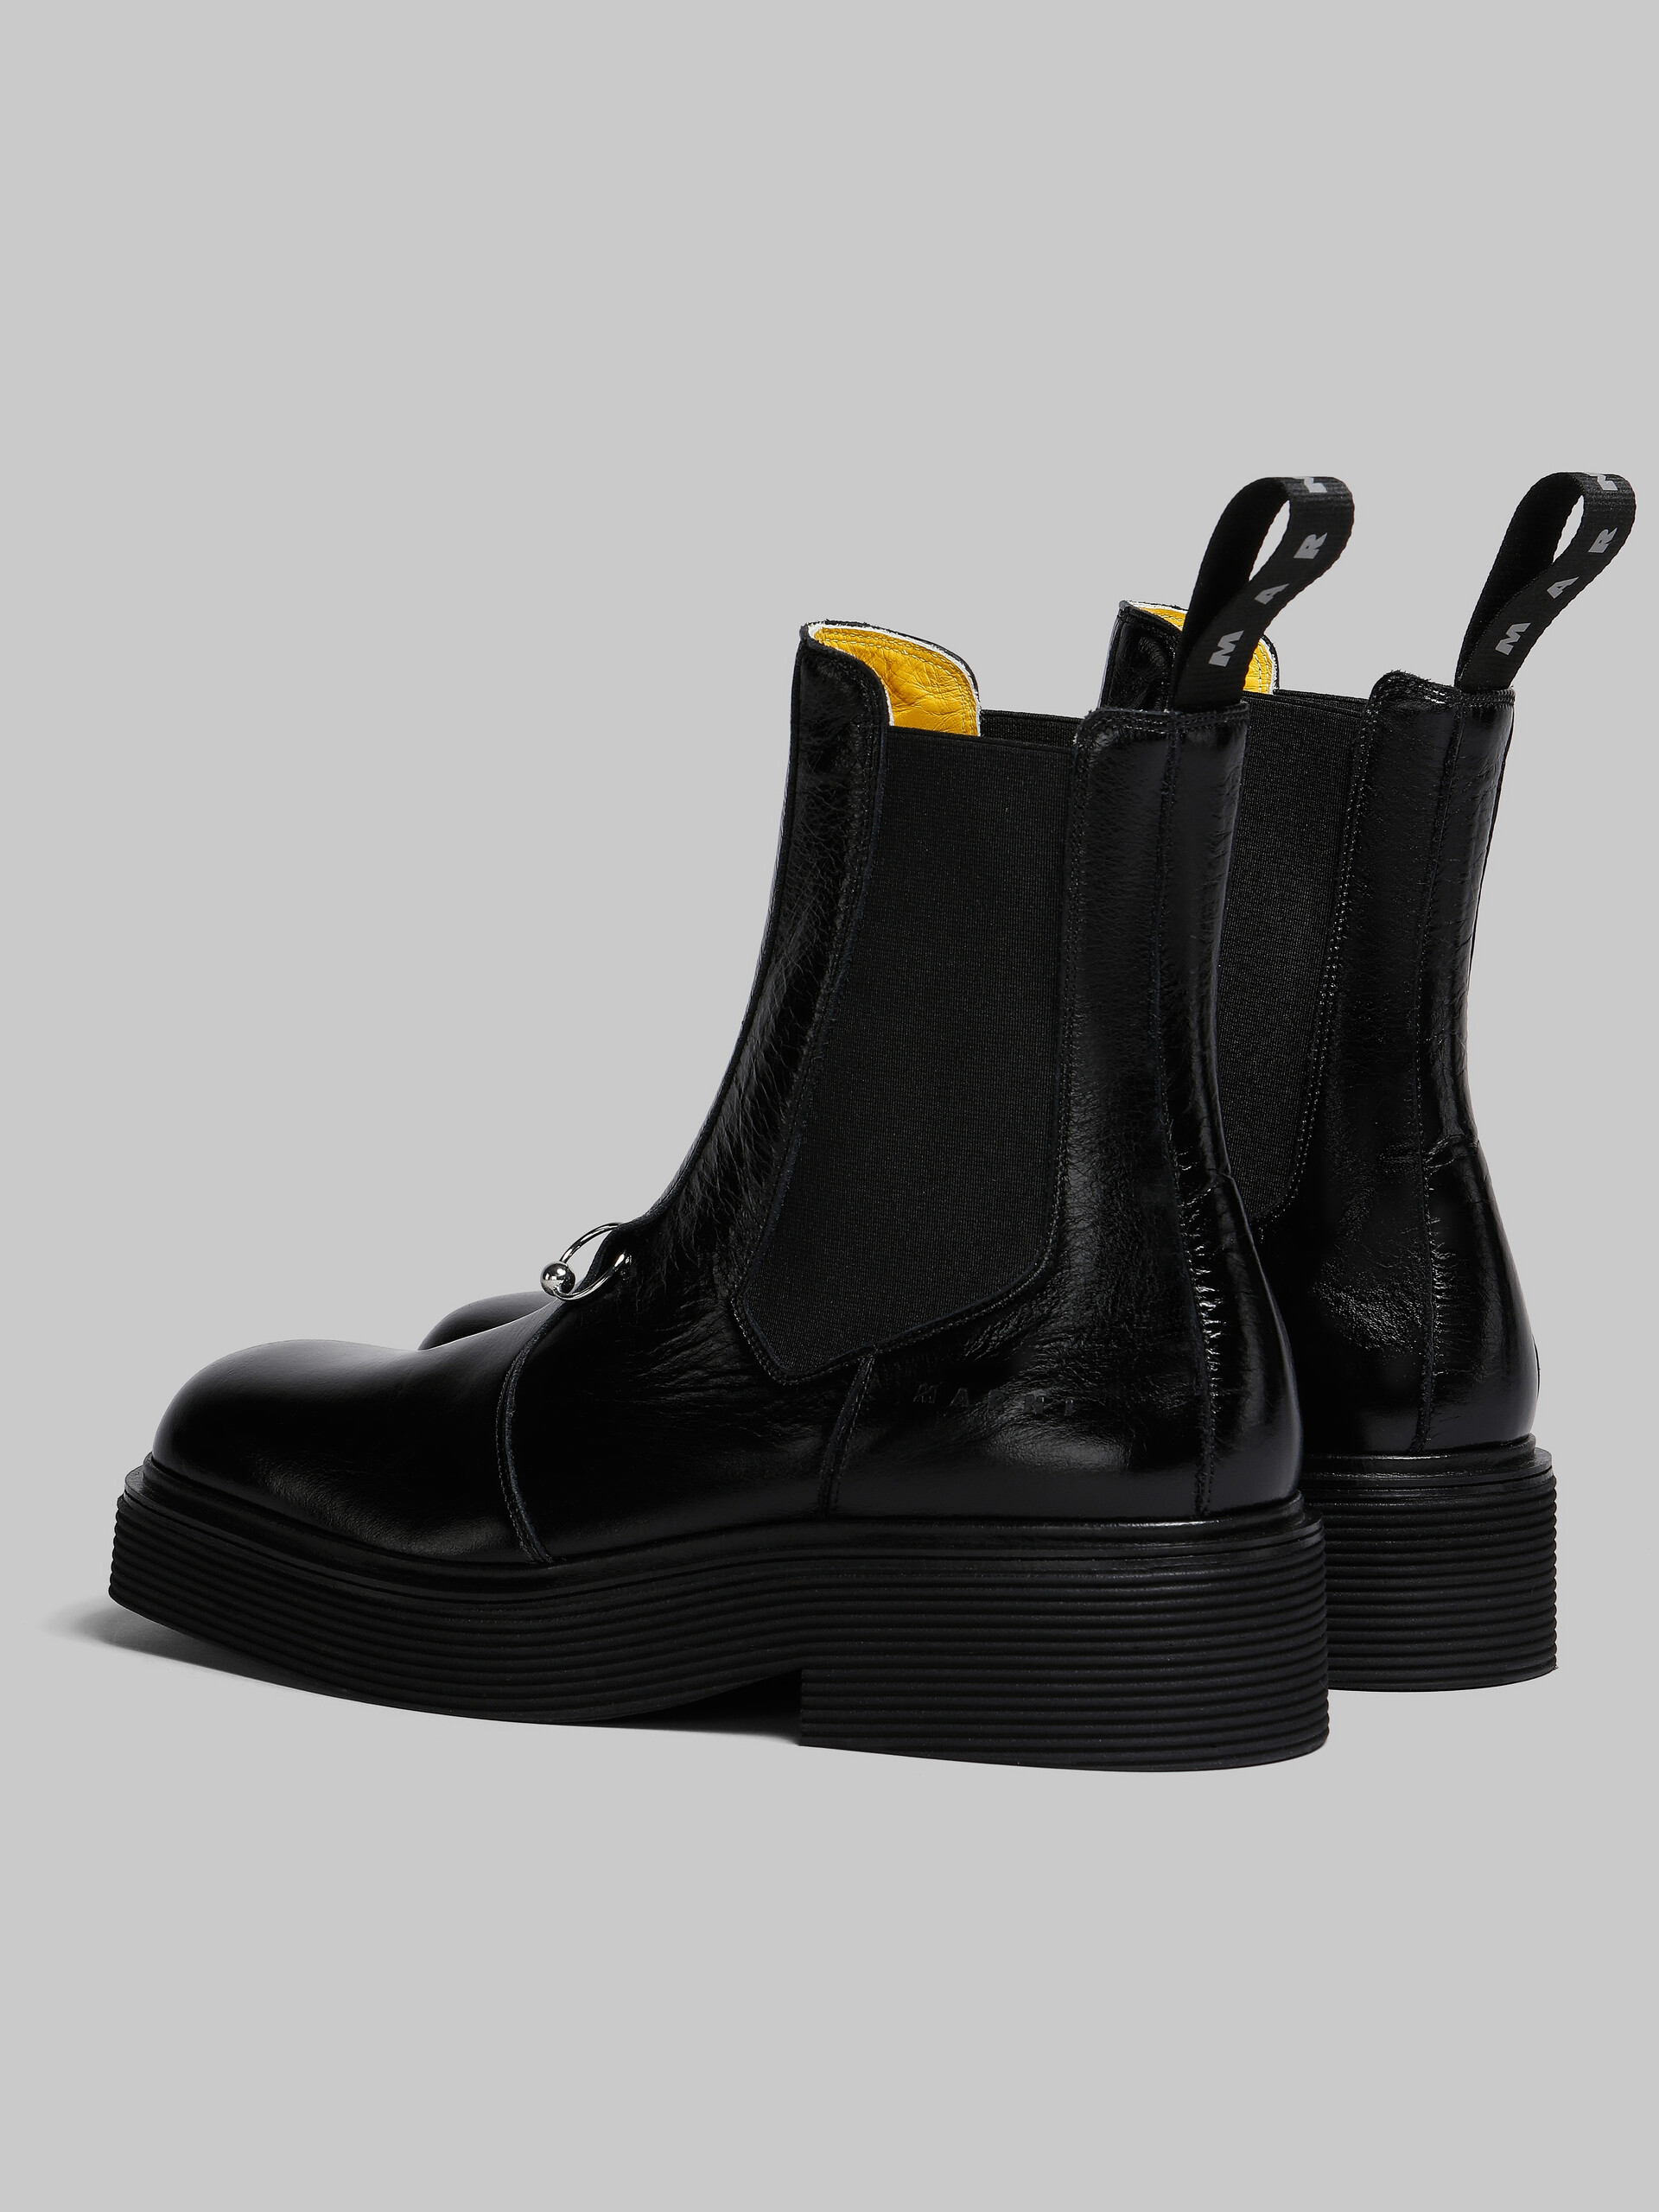 Black leather Chelsea boot - Boots - Image 3